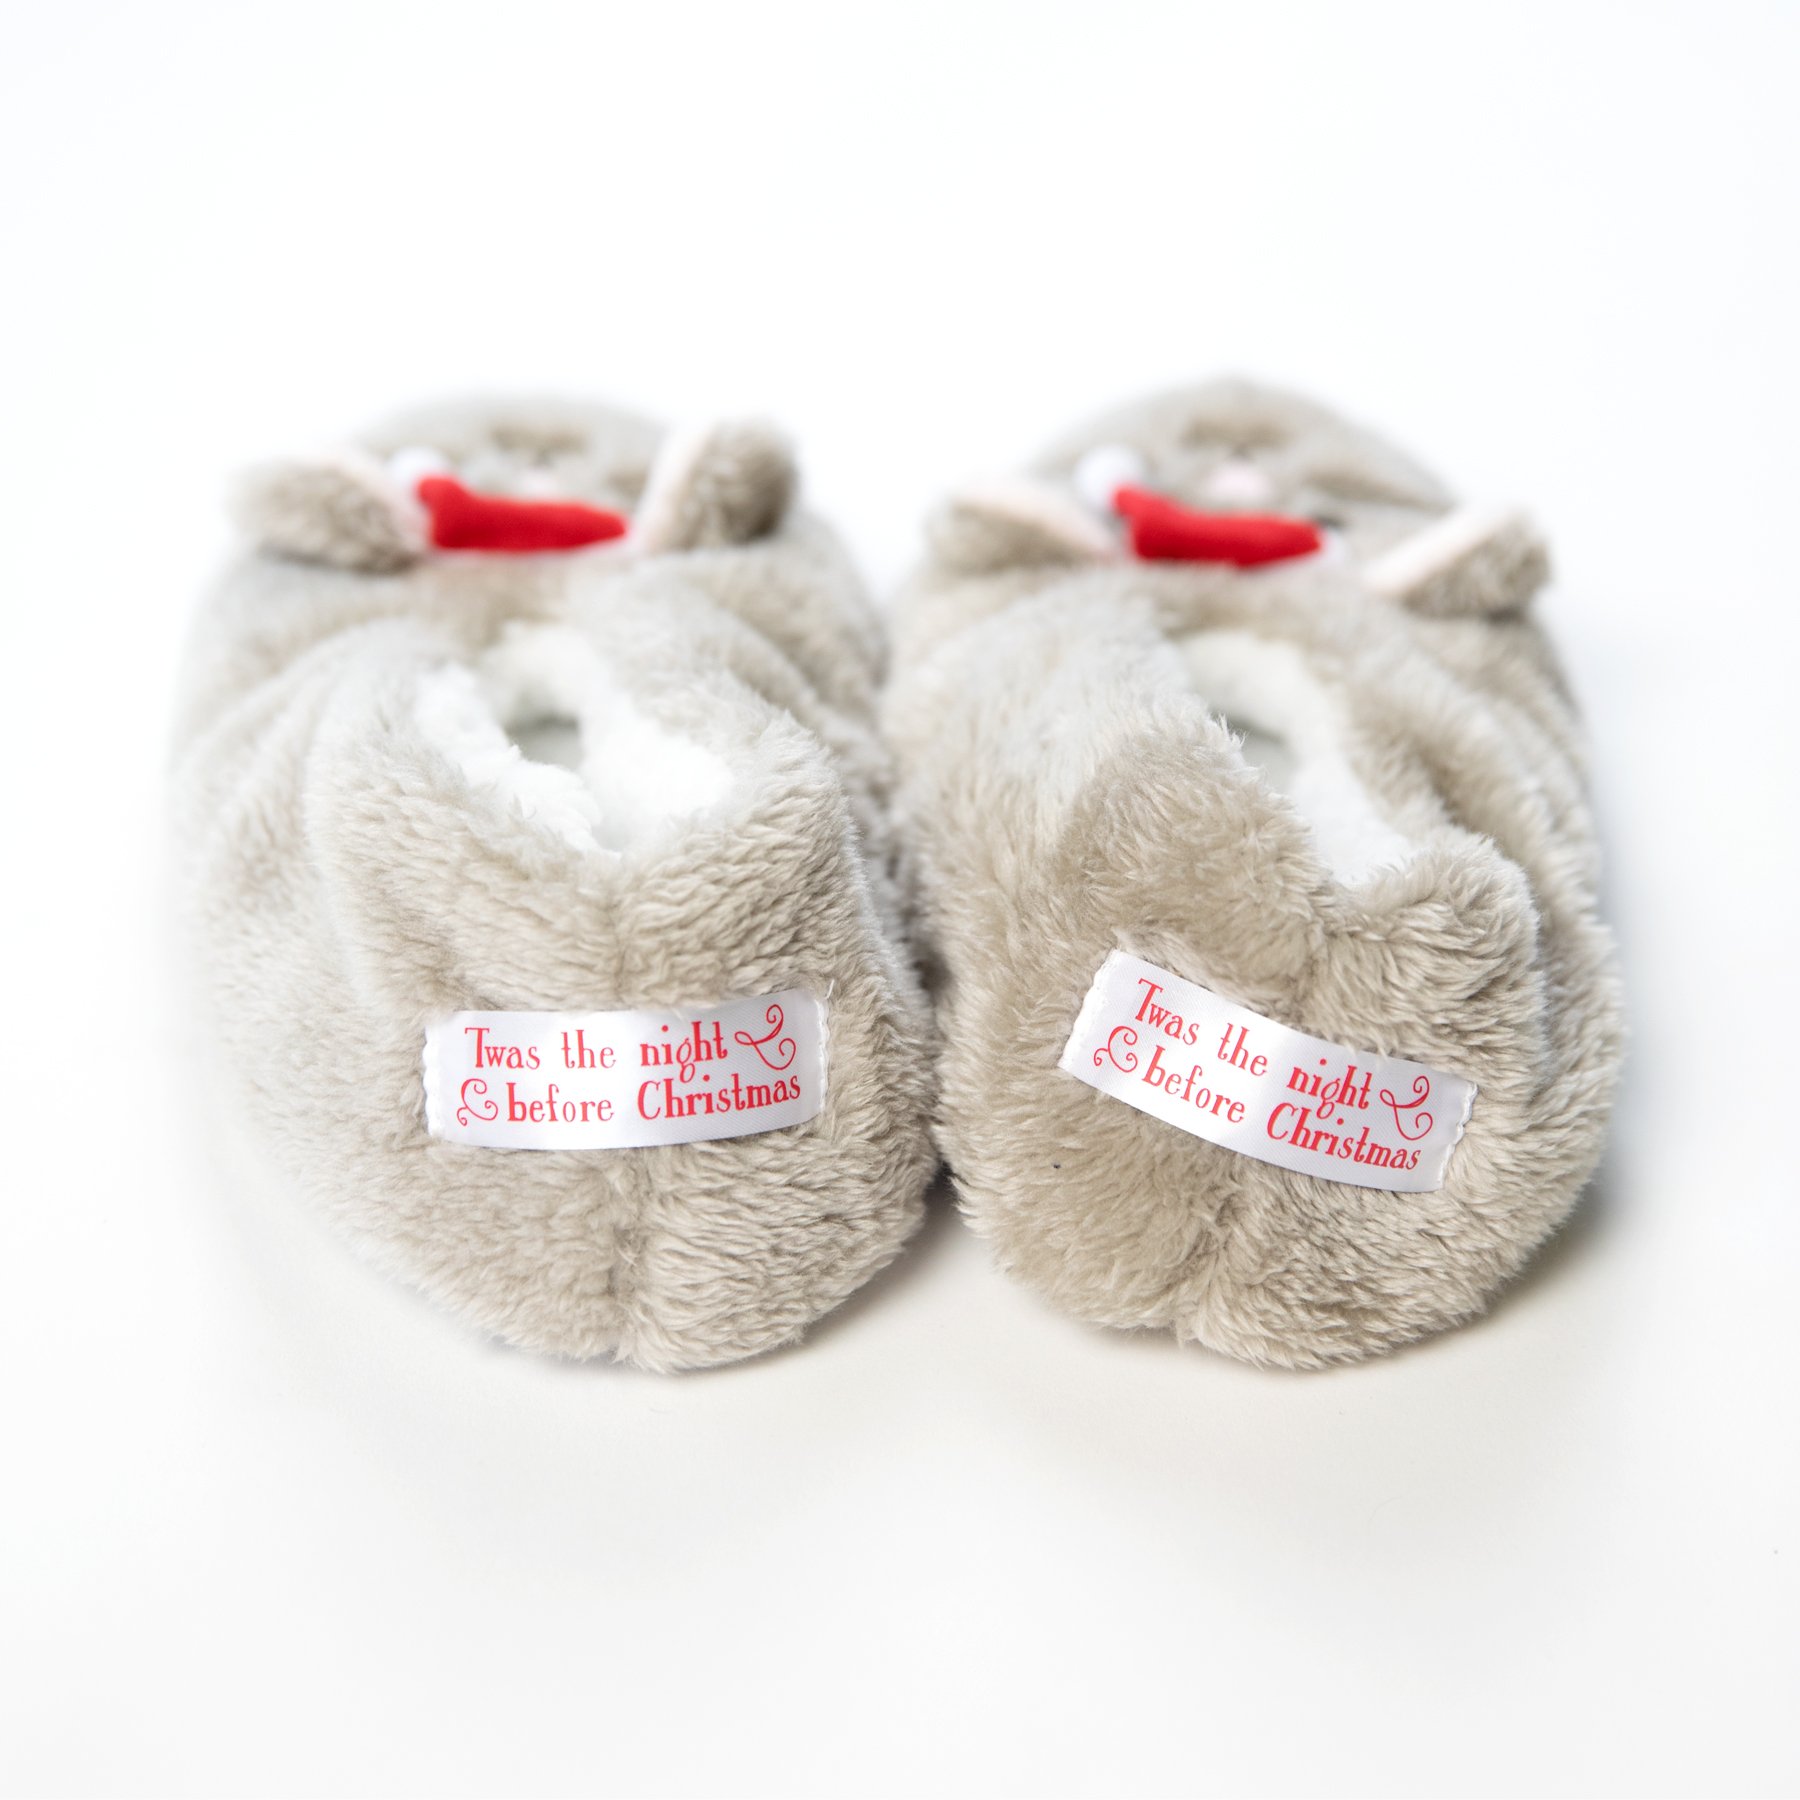 Faceplant Dreams Footsies Slippers Mouse Holiday Motif Large - image 2 of 5